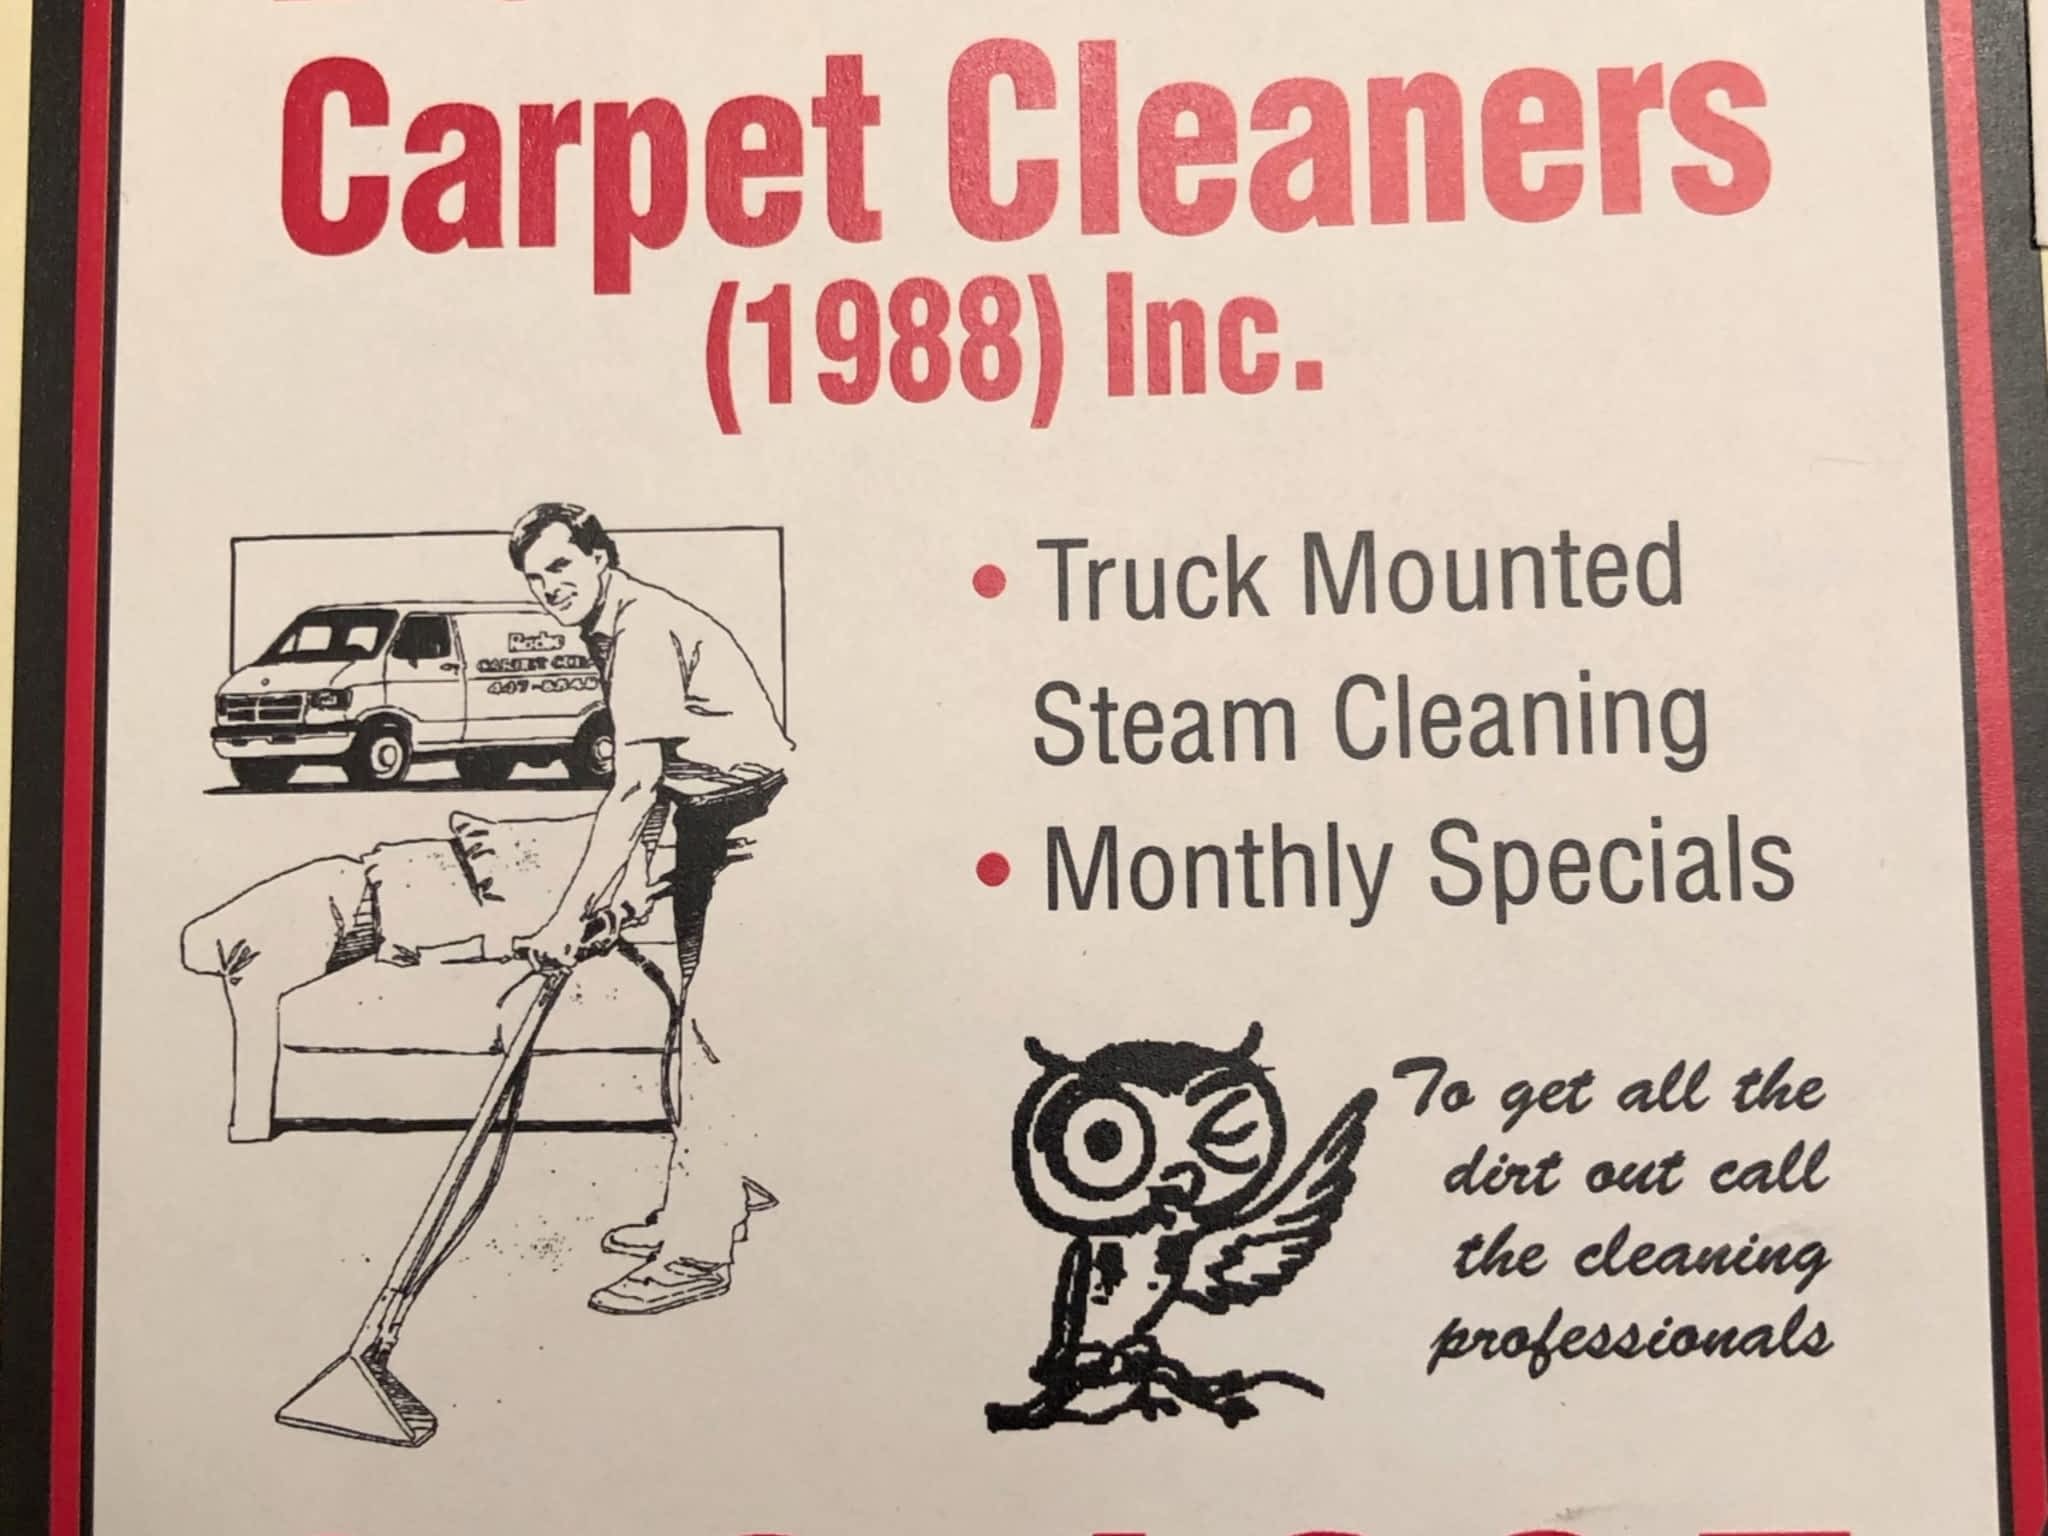 photo Better Care Carpet Cleaners